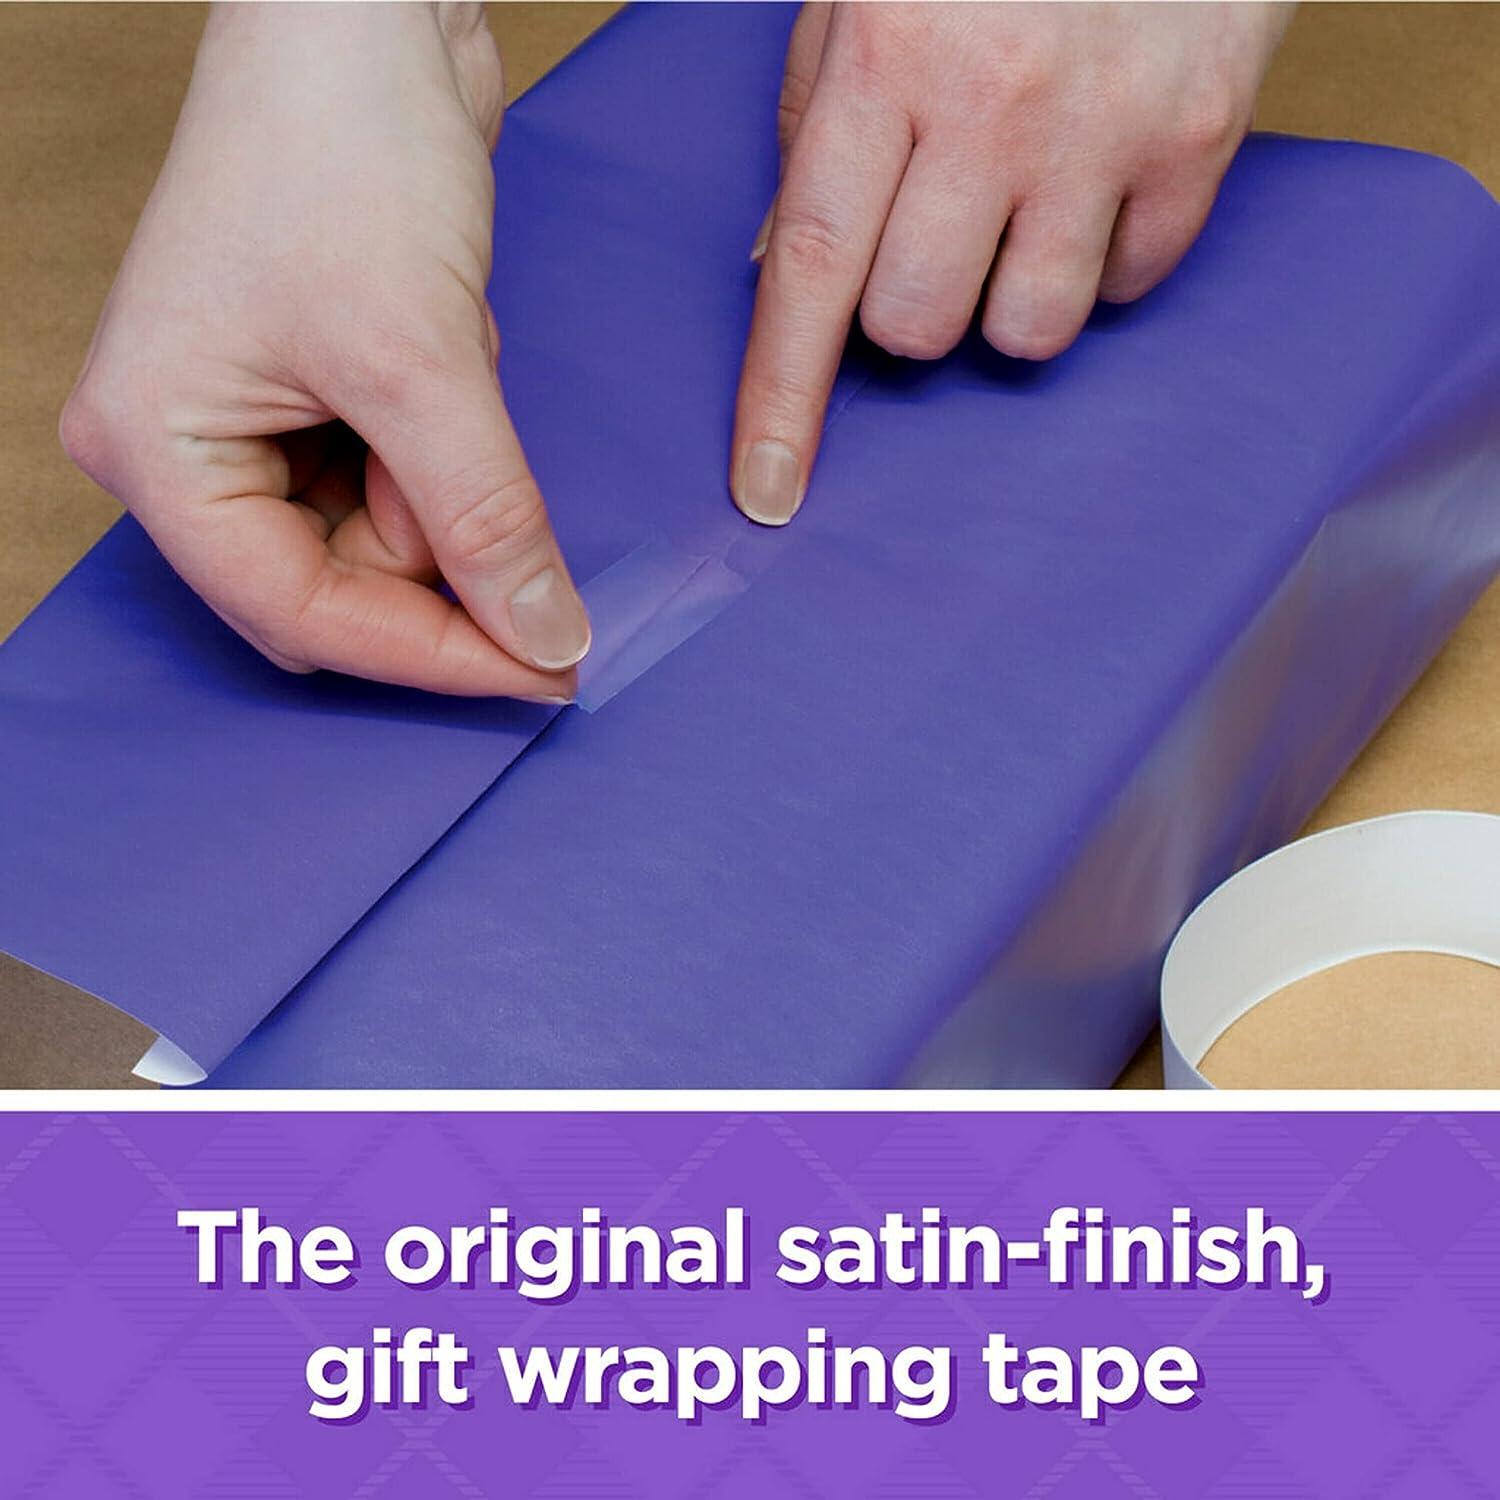 Scotch Gift Wrap Tape, 6 Rolls, The Go-To Tape for The Holidays, 3/4 x 650 Inches, Dispensered (615-gw)